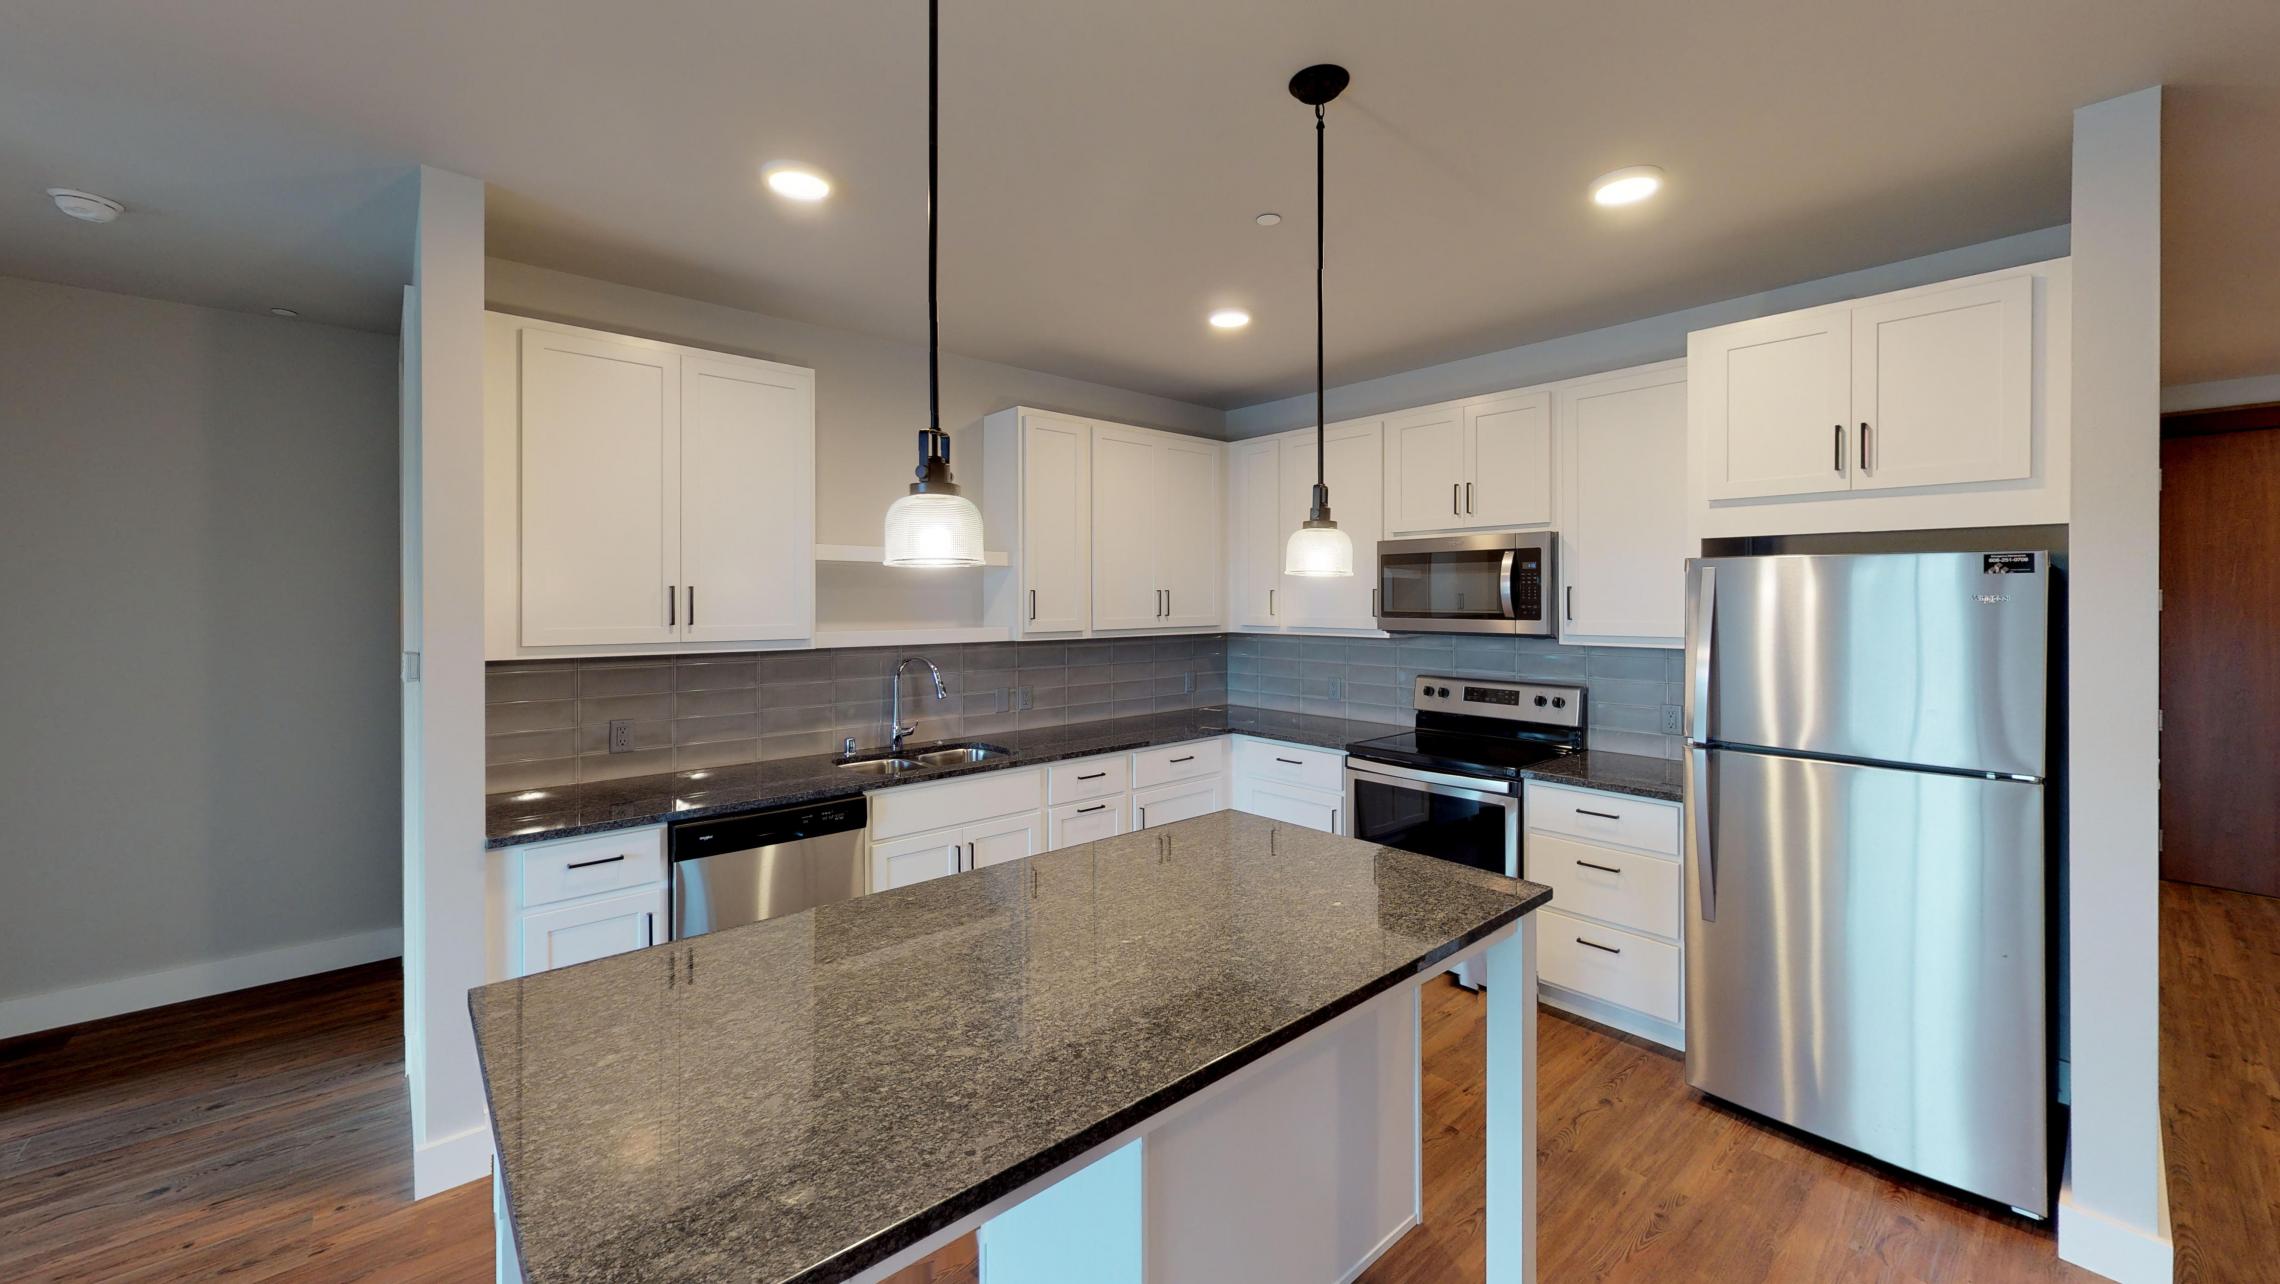 1722-Monroe-Apartment-318-One-Bedroom-Bathroom-Kitchen-Living-Sunny-Bright-Modern-Lifestyle-Cats-Dogs-Fitness-Terrace-Captiol-Madison-City-Upscale-Design